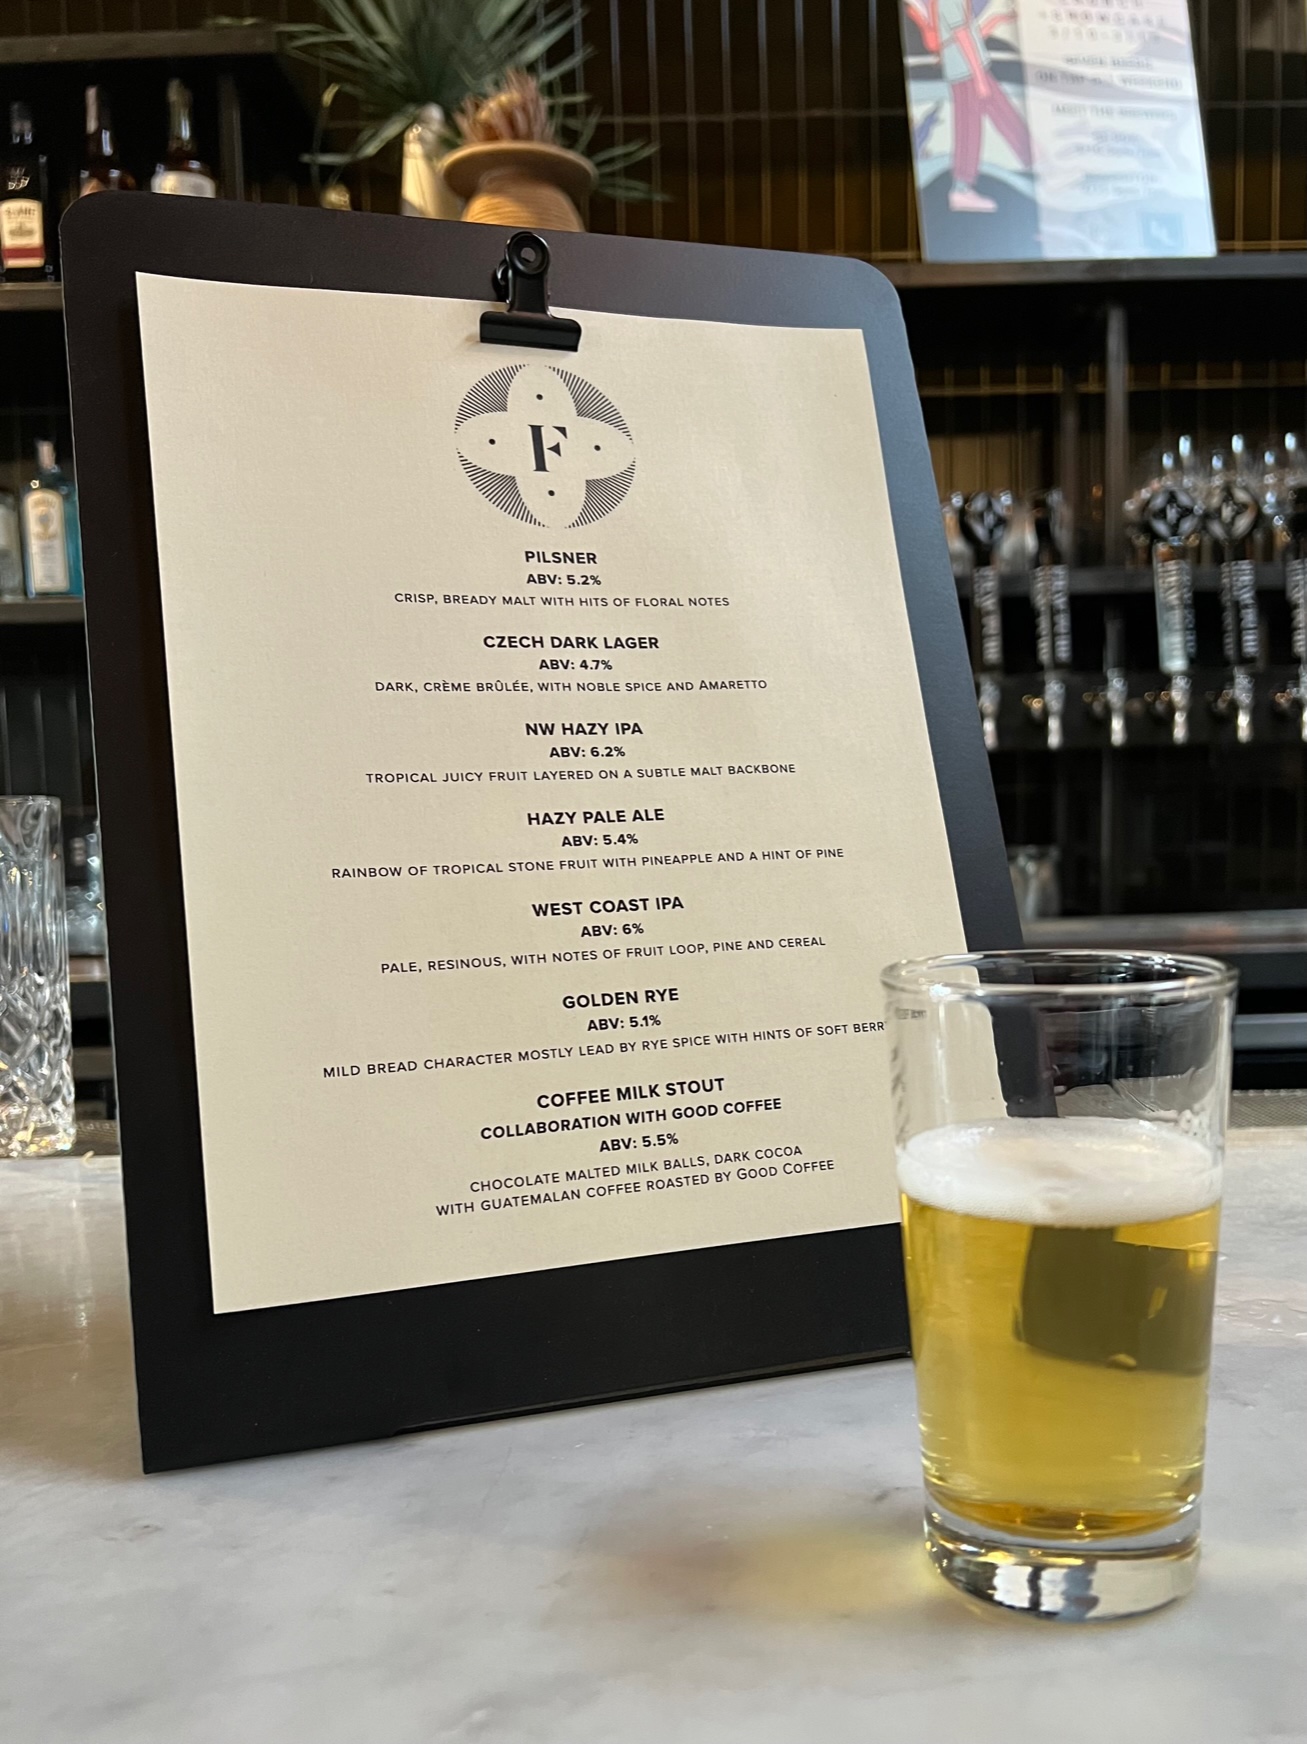 Fracture Brewing tap list during a preview event earlier this week.